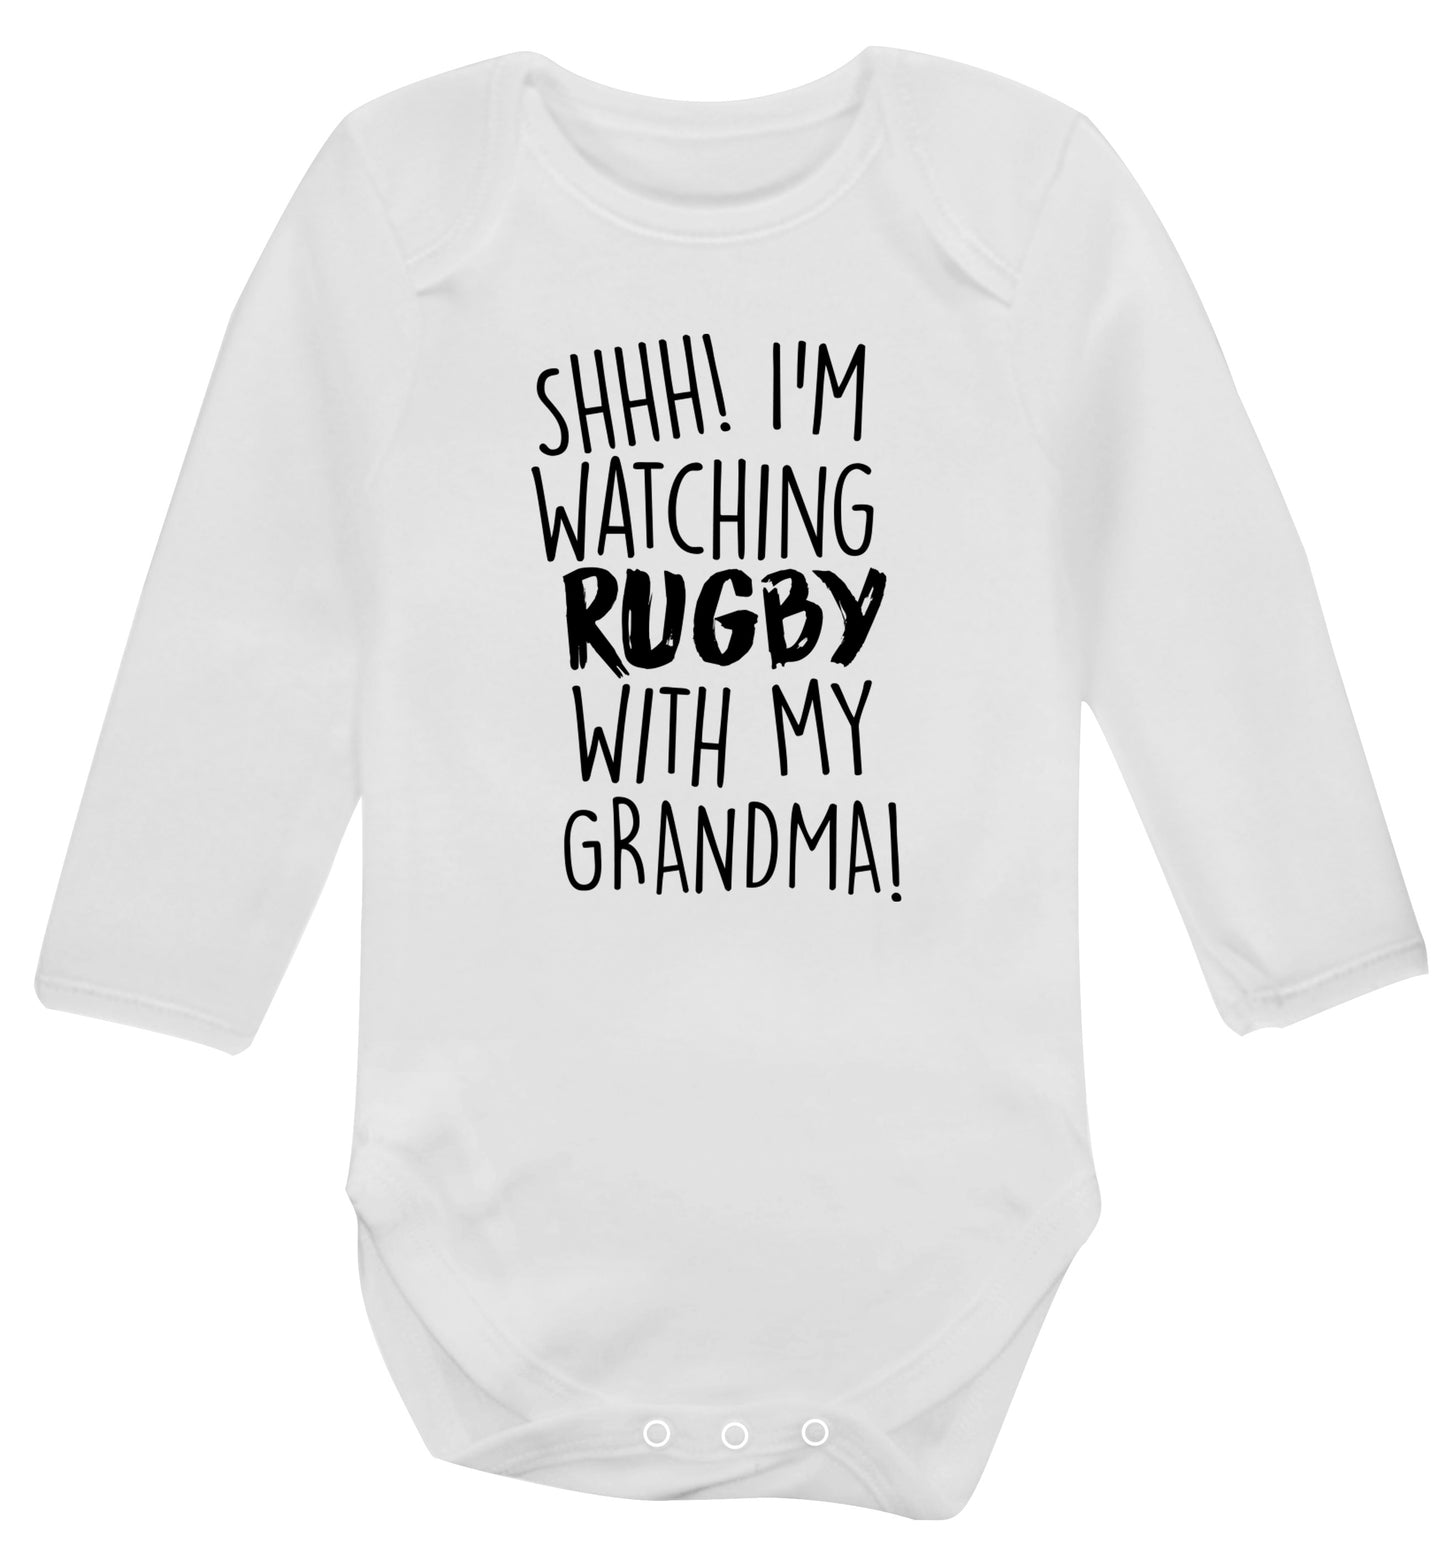 Shh I'm watching rugby with my grandma Baby Vest long sleeved white 6-12 months